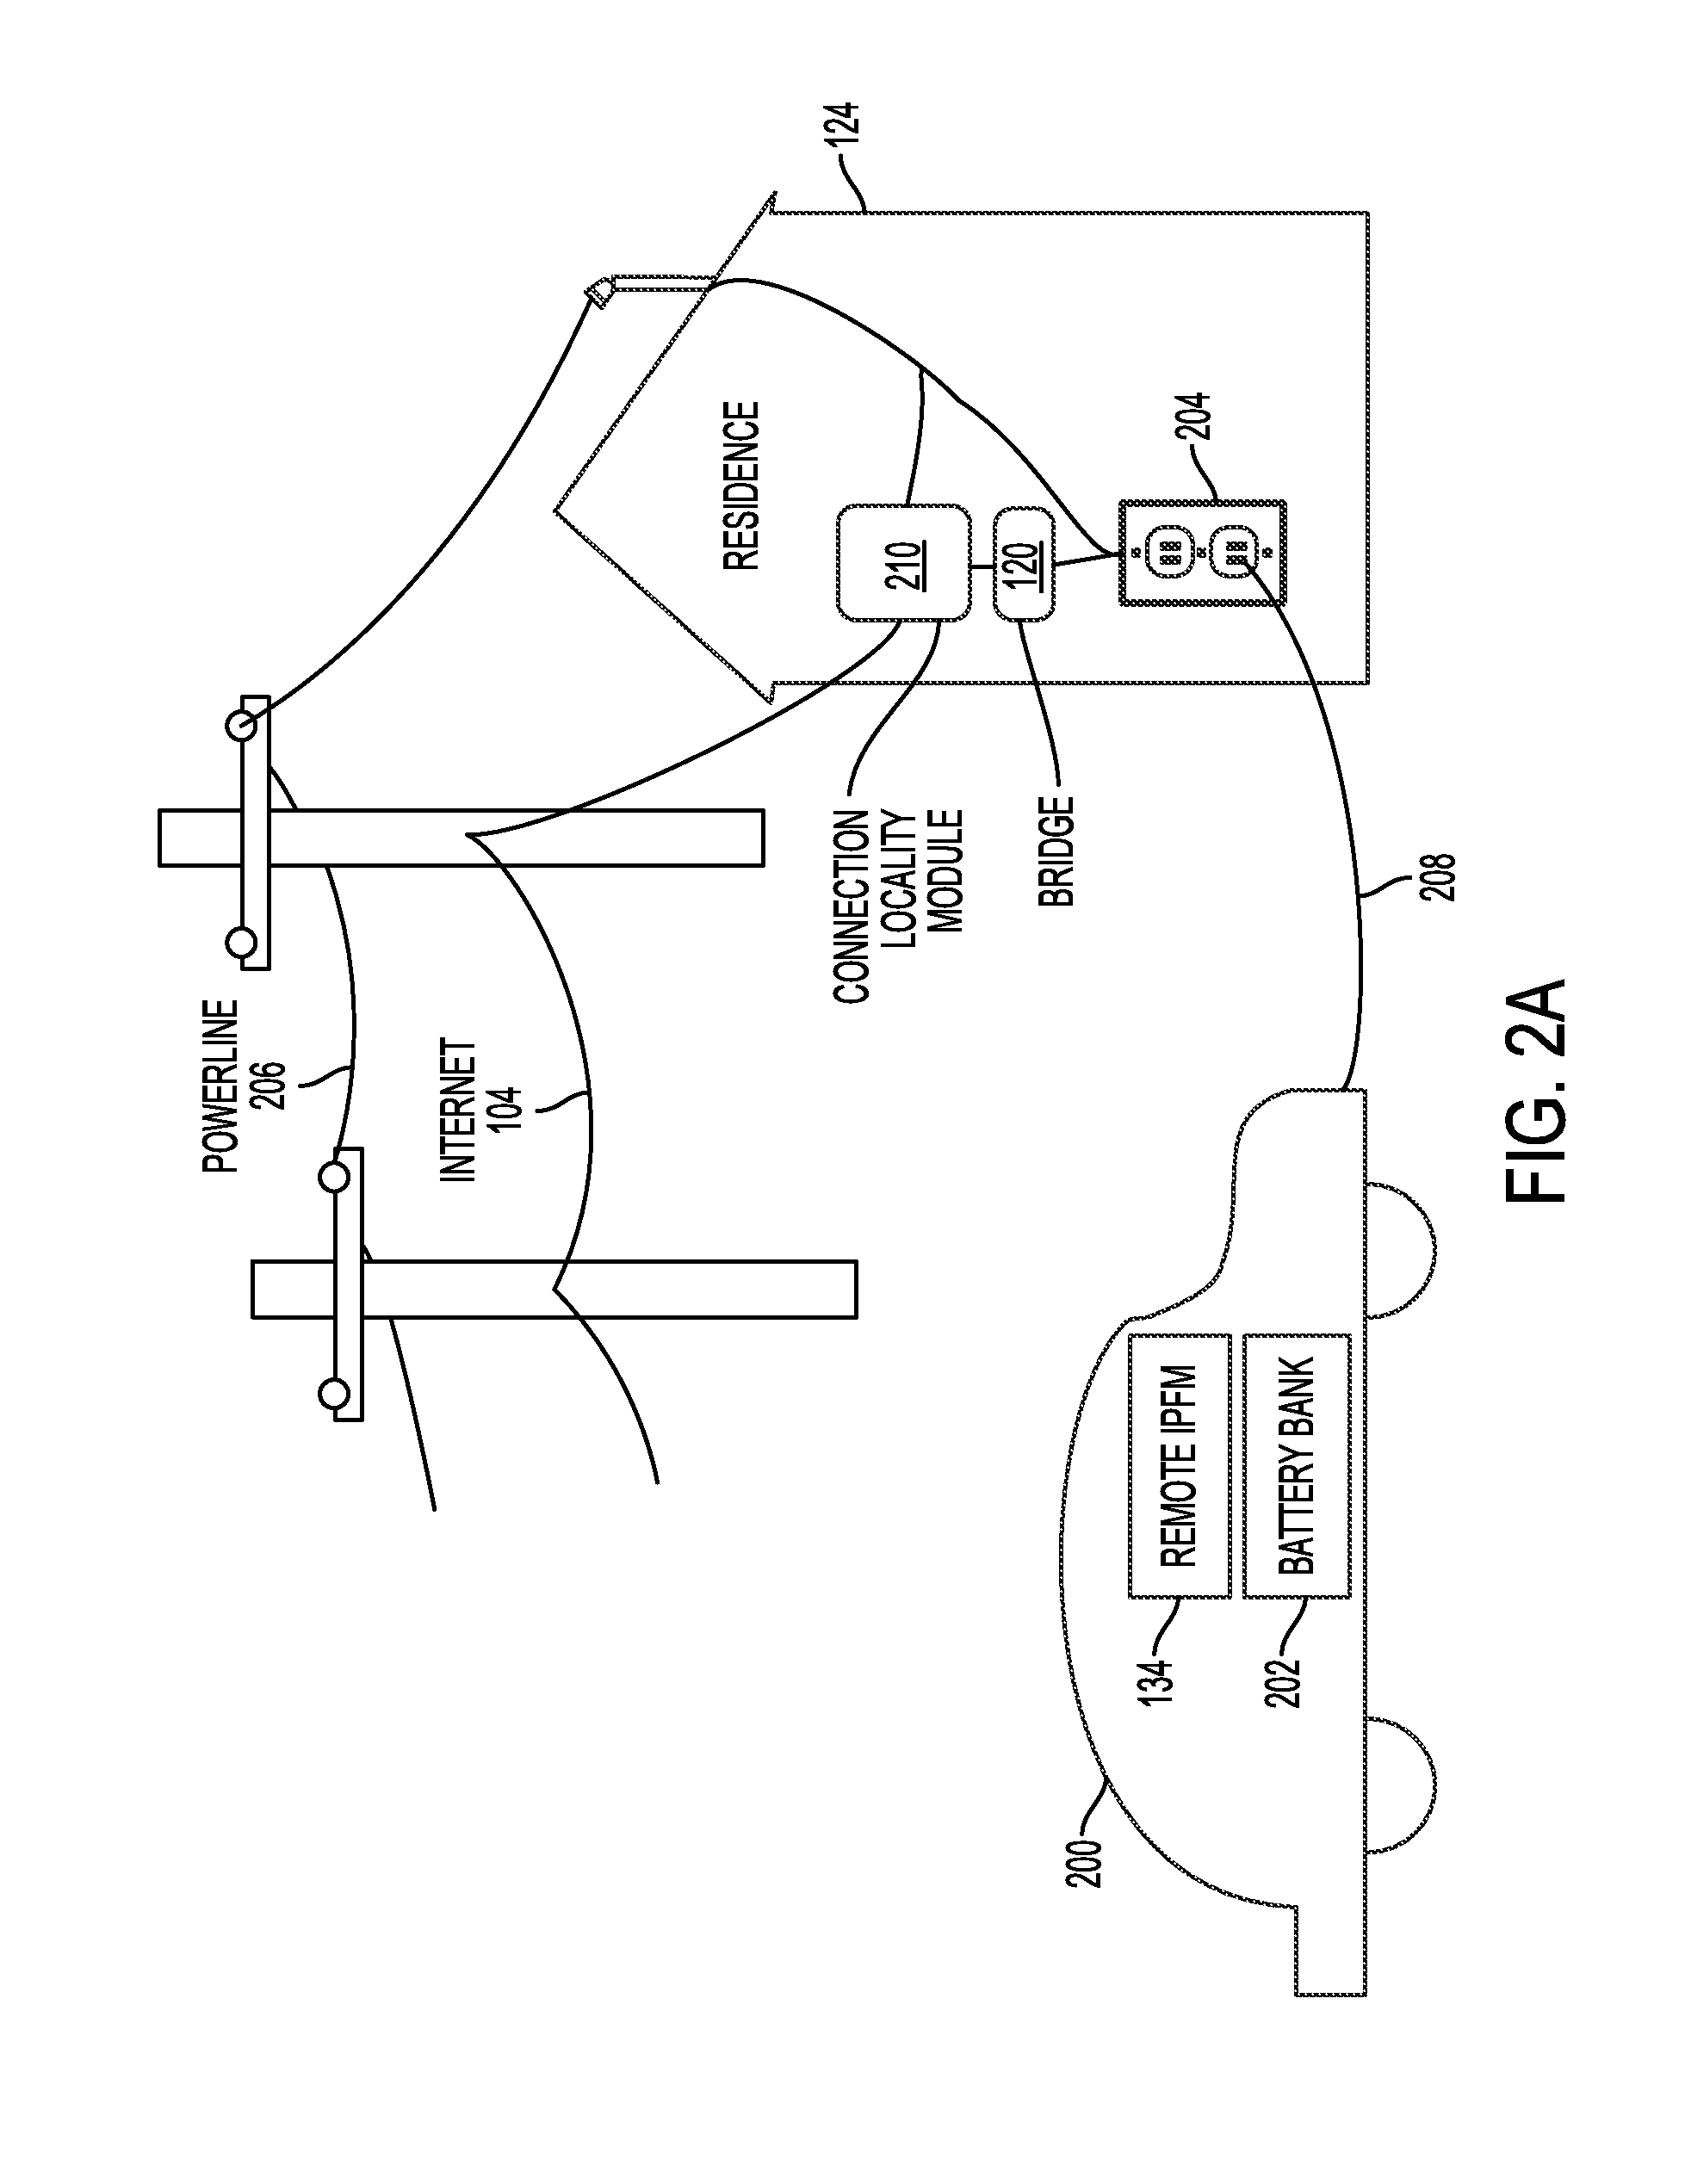 System communication systems and methods for electric vehicle power management